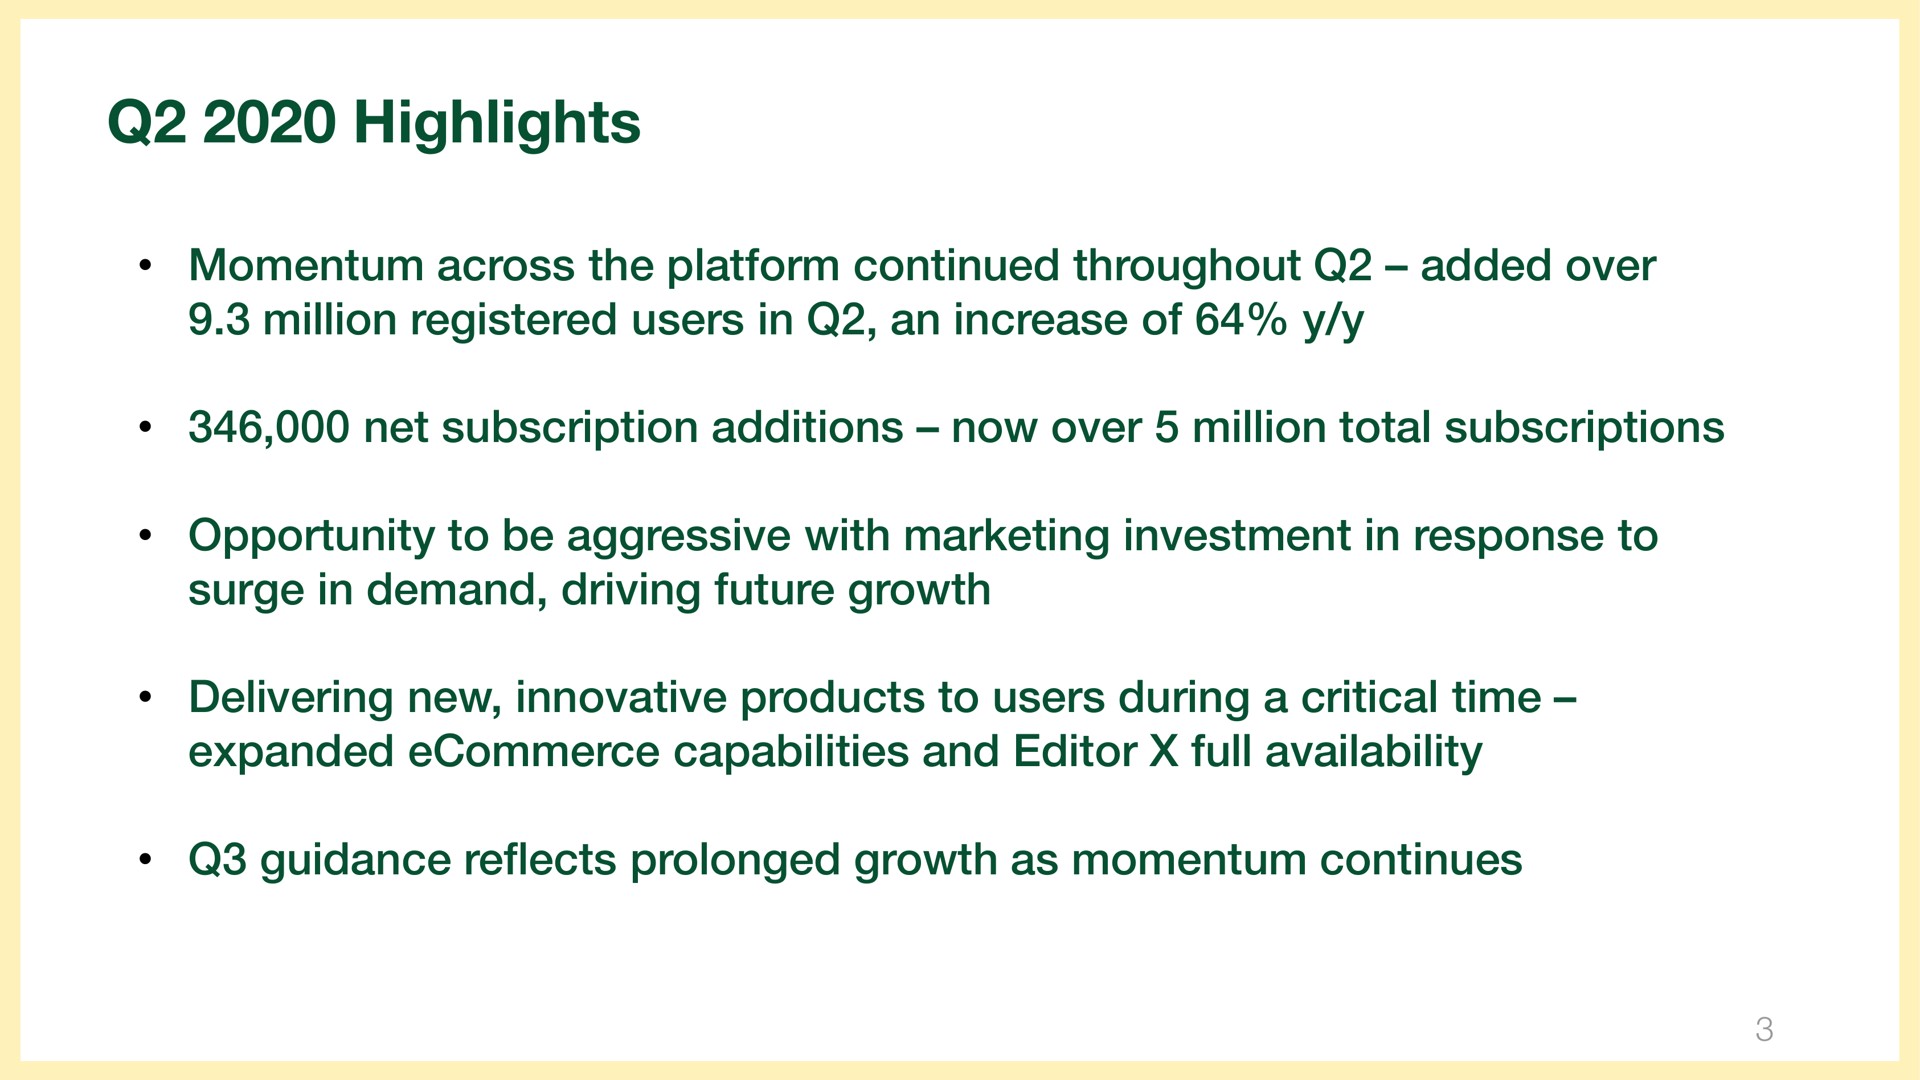 highlights momentum across the platform continued throughout added over million registered users in an increase of net subscription additions now over million total subscriptions opportunity to be aggressive with marketing investment in response to surge in demand driving future growth delivering new innovative products to users during a critical time expanded capabilities and editor full availability guidance reflects prolonged growth as momentum continues | Wix